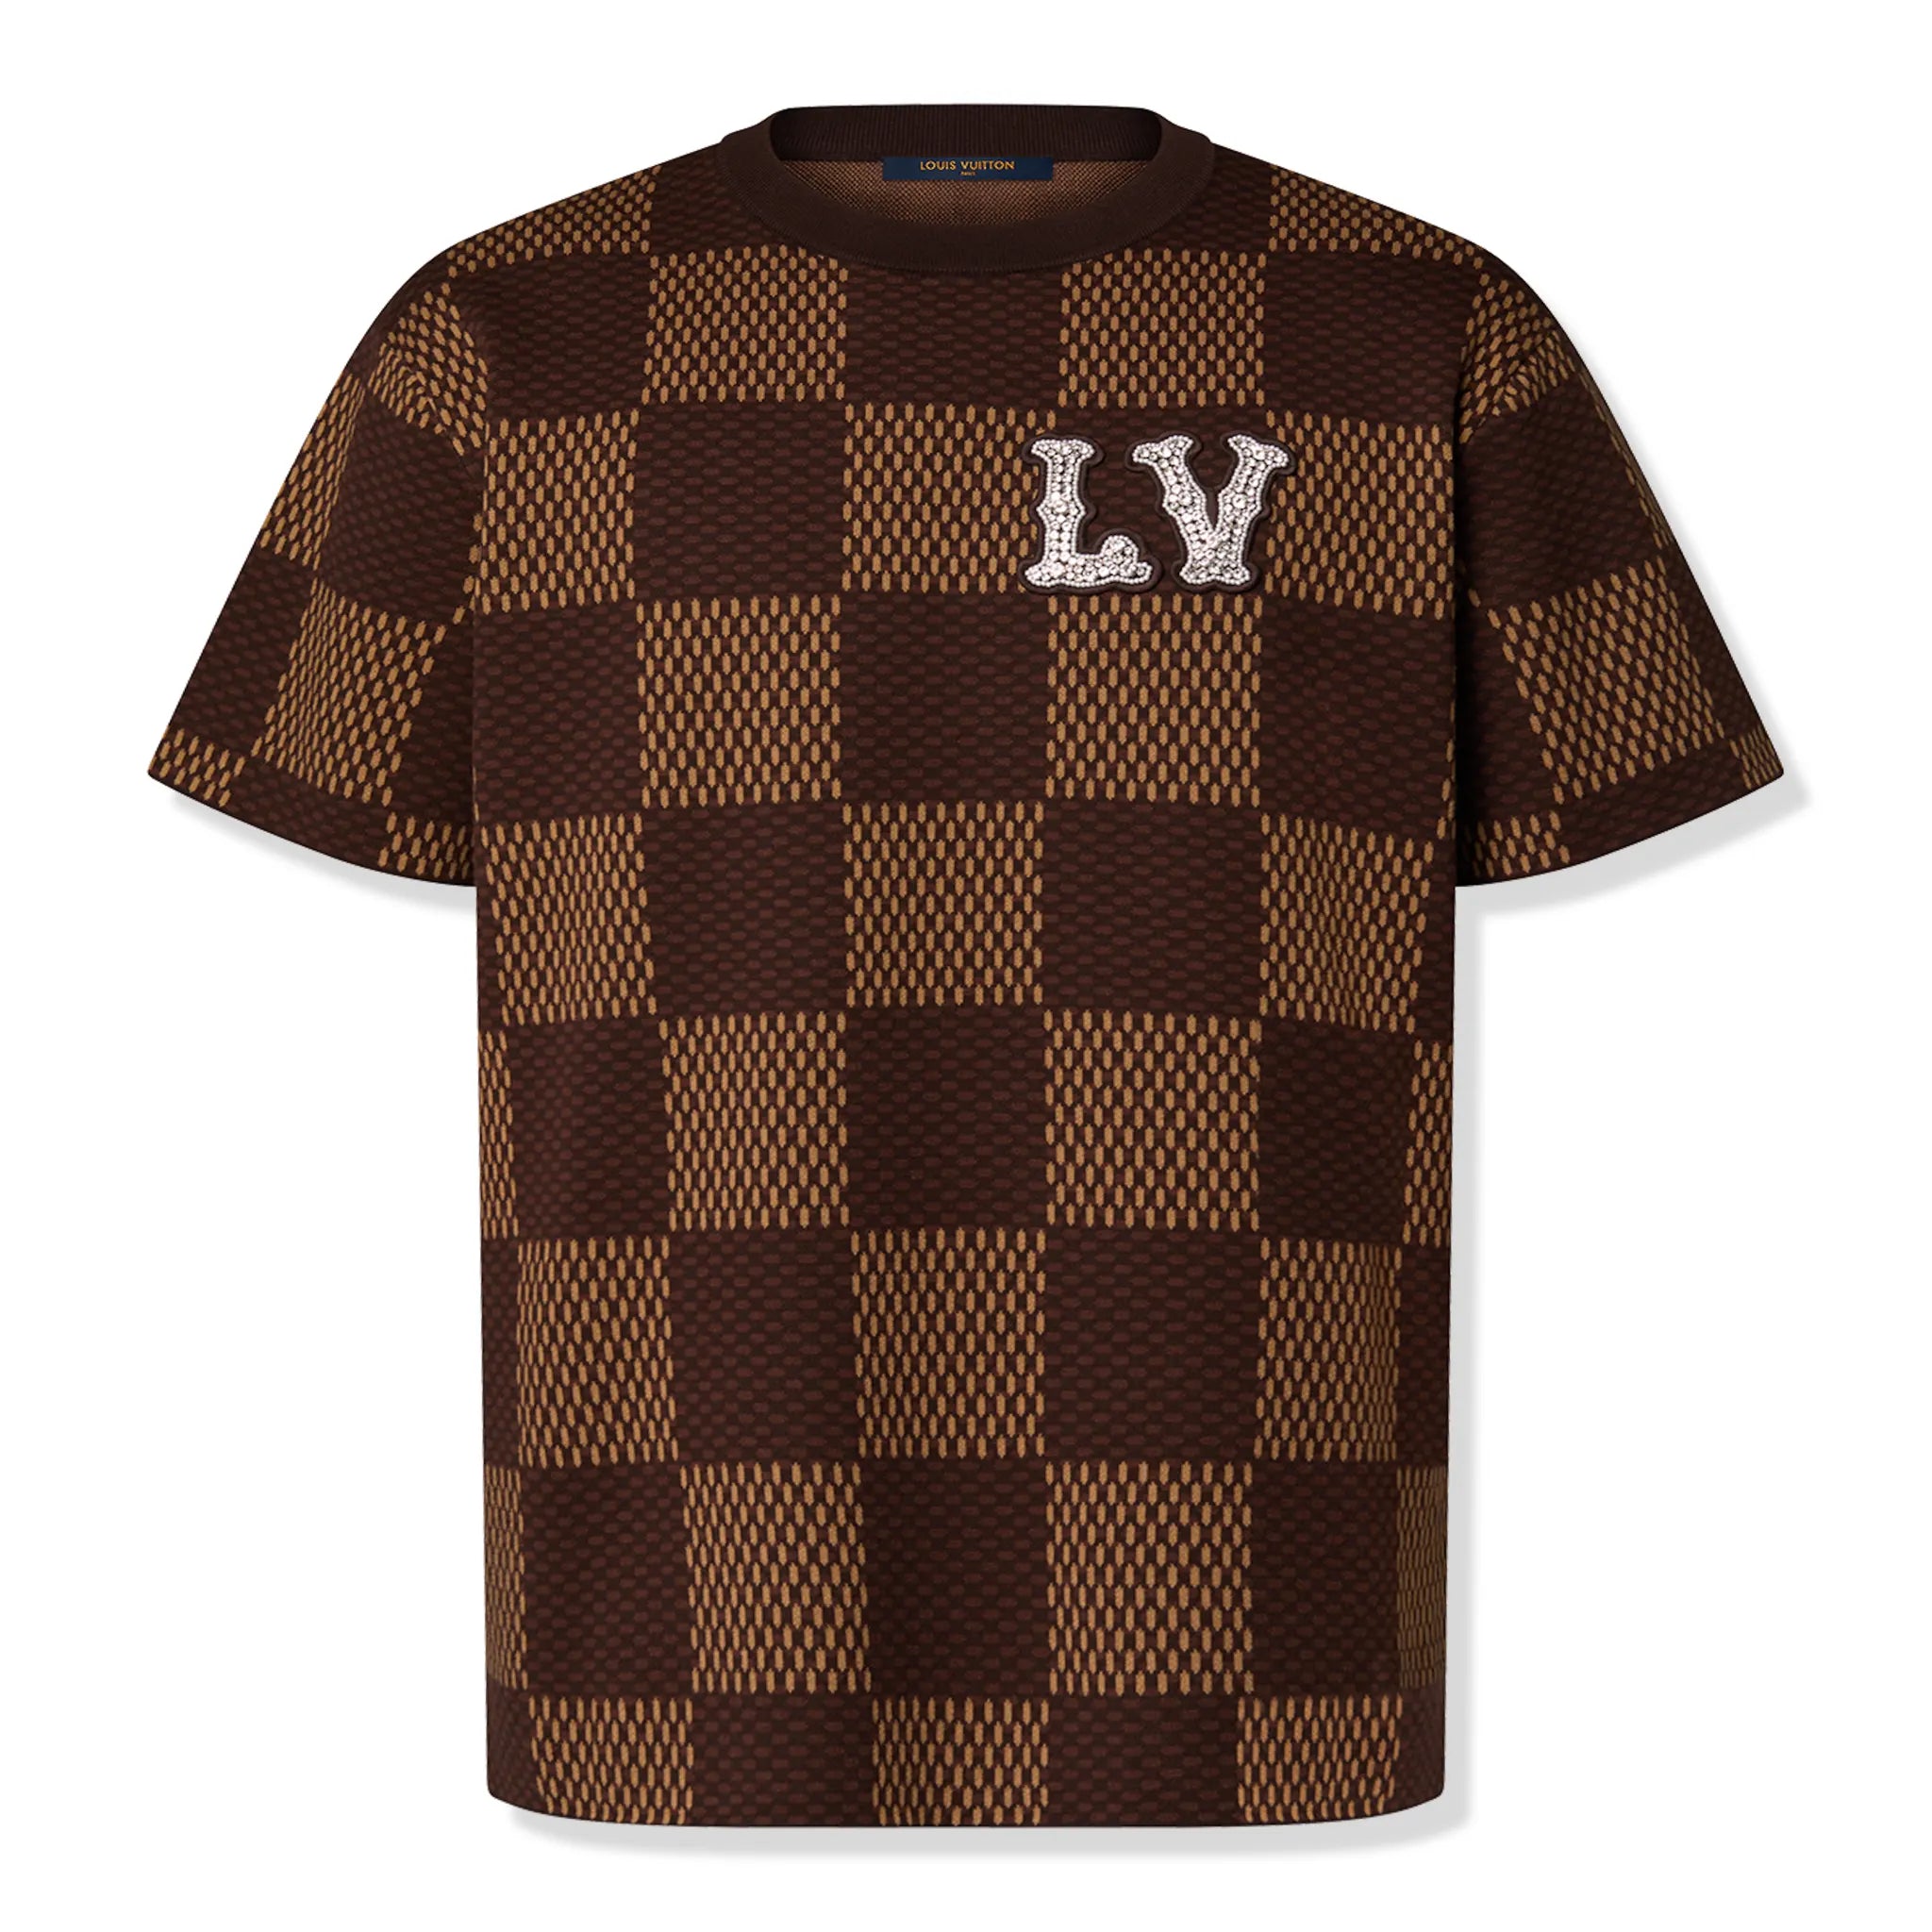 Front view of Louis Vuitton Damier LV Crystal Patch Brown T Shirt NVPROD4940223V